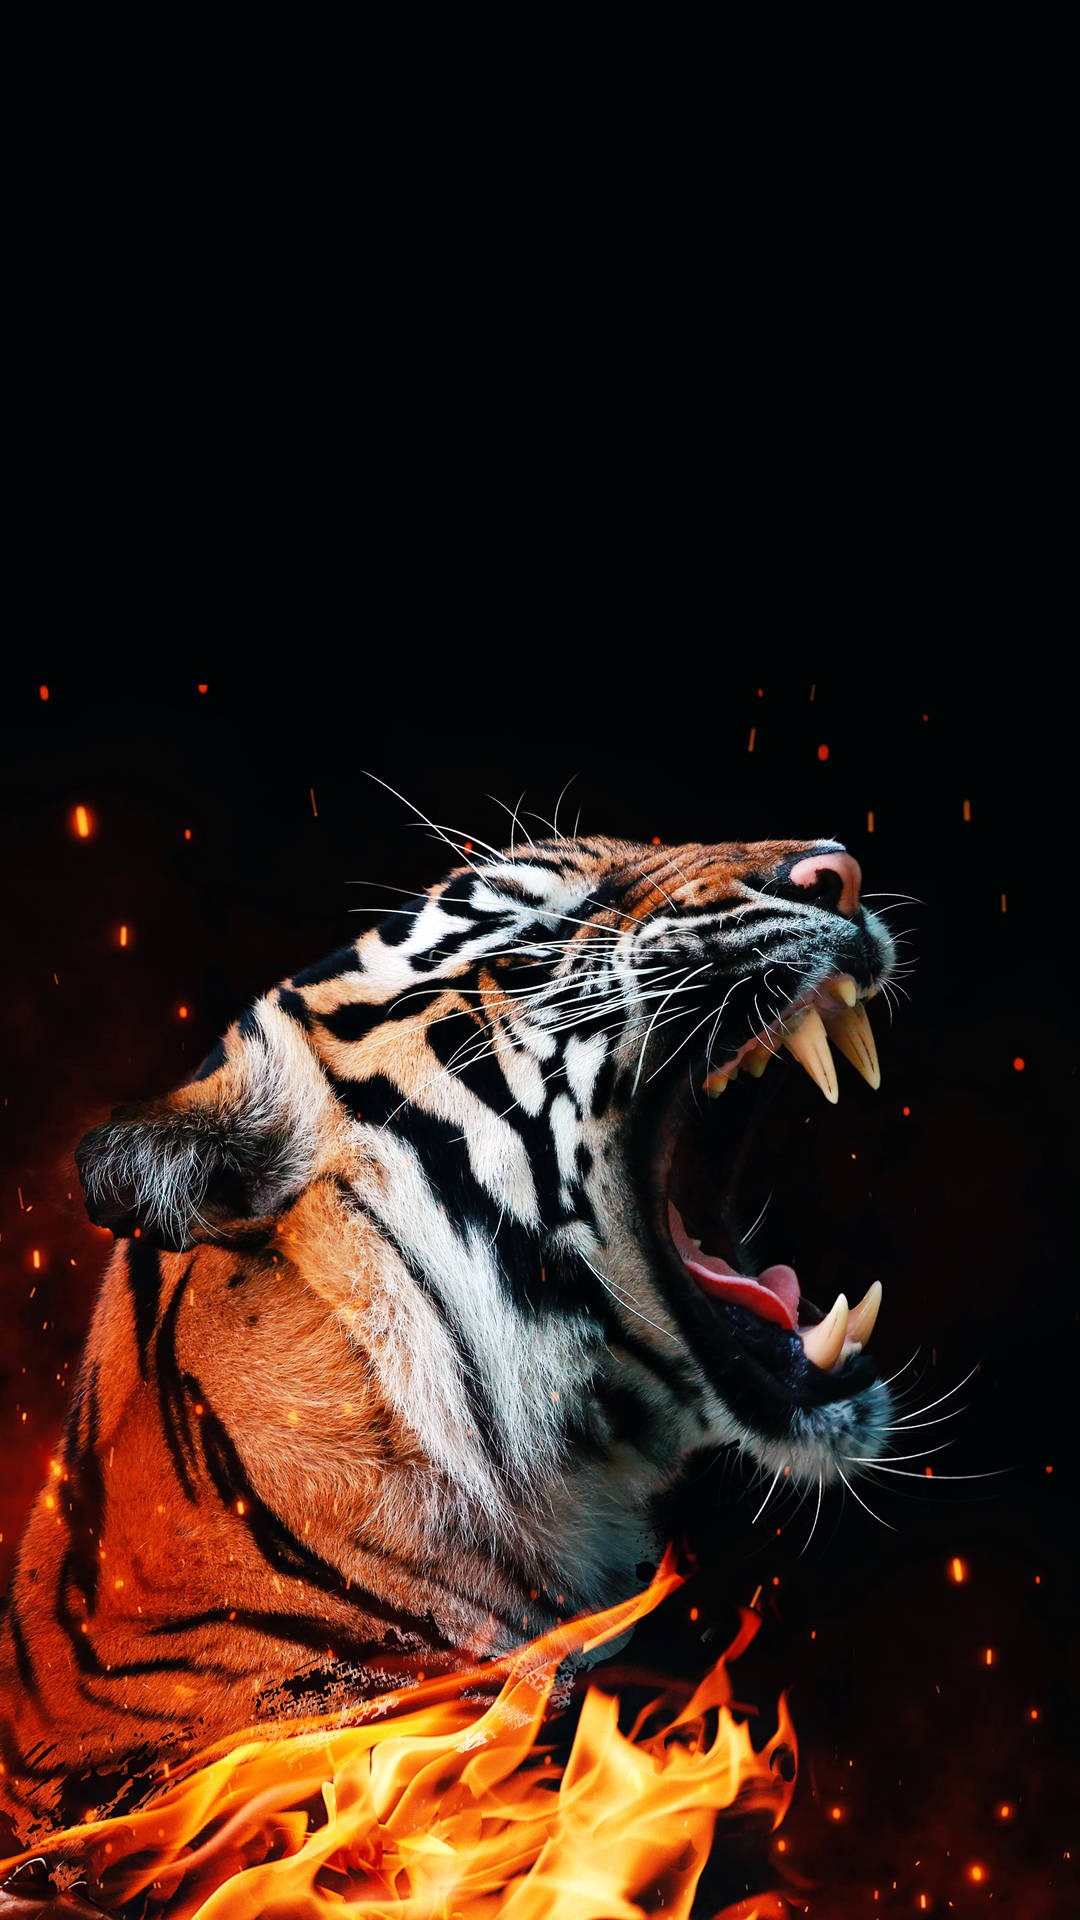 Cool Tiger Photo In Fire